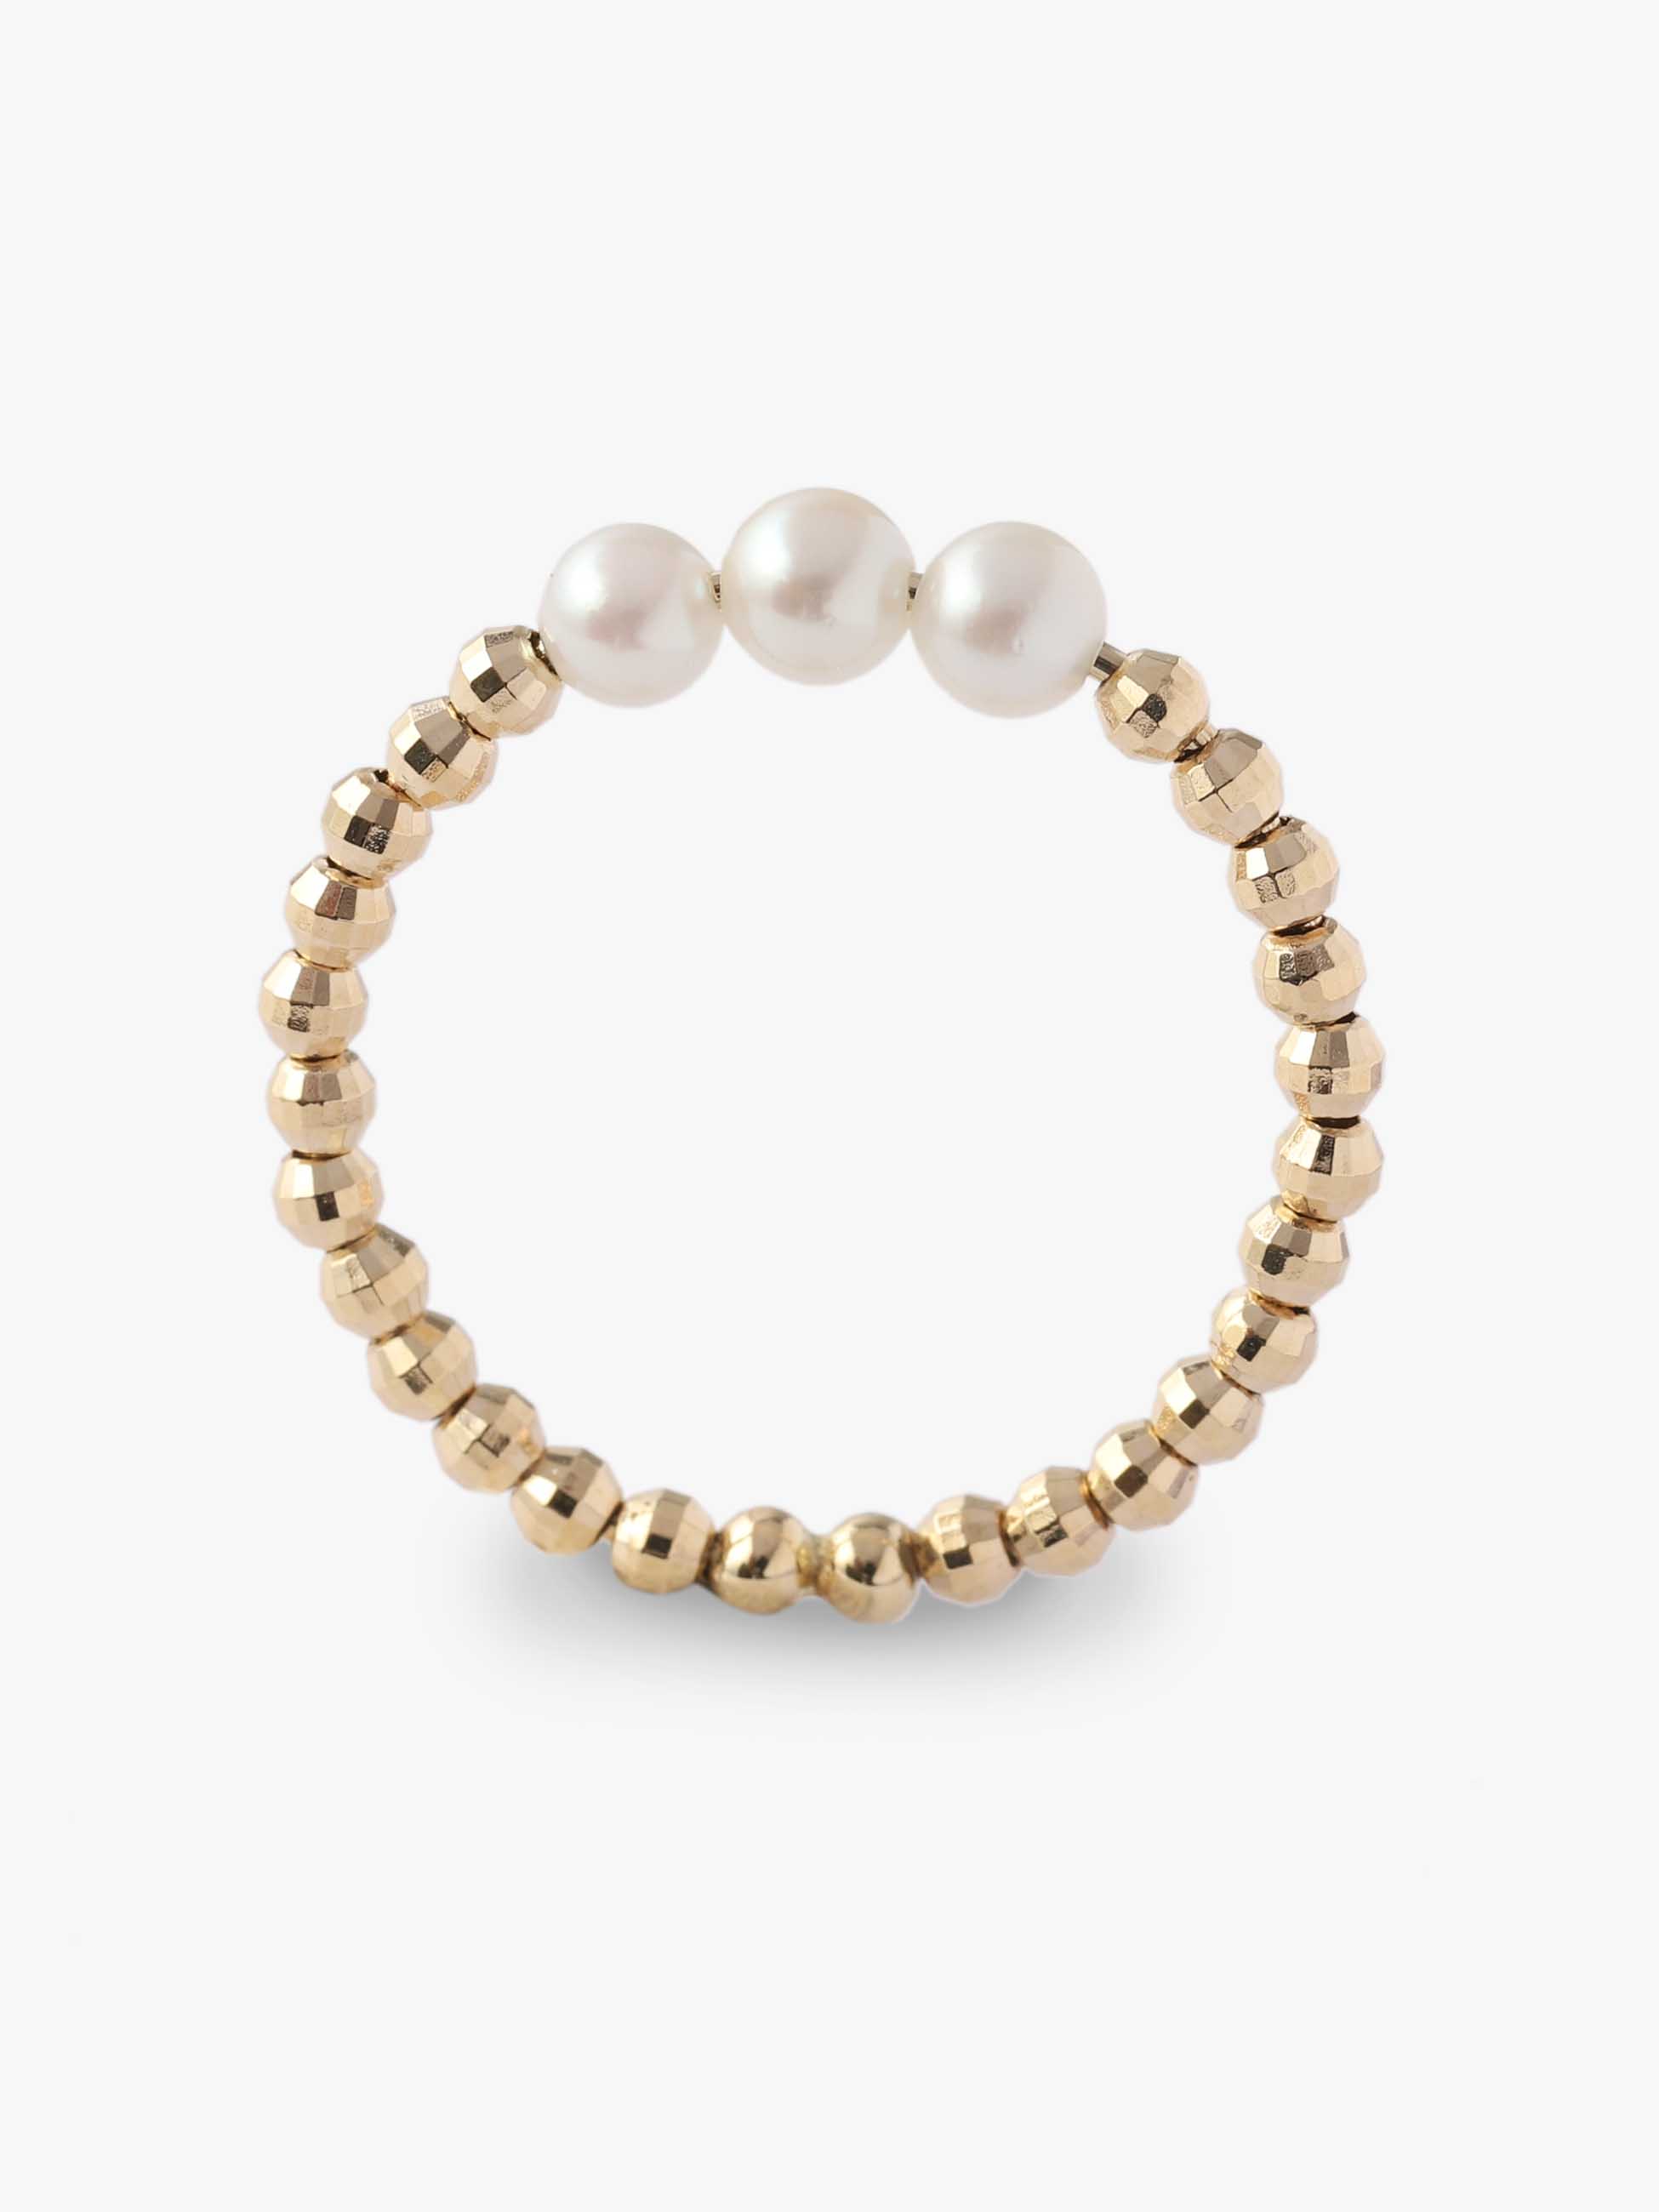 14K Yellow Gold Cut Beads and 3 Pearl Ring